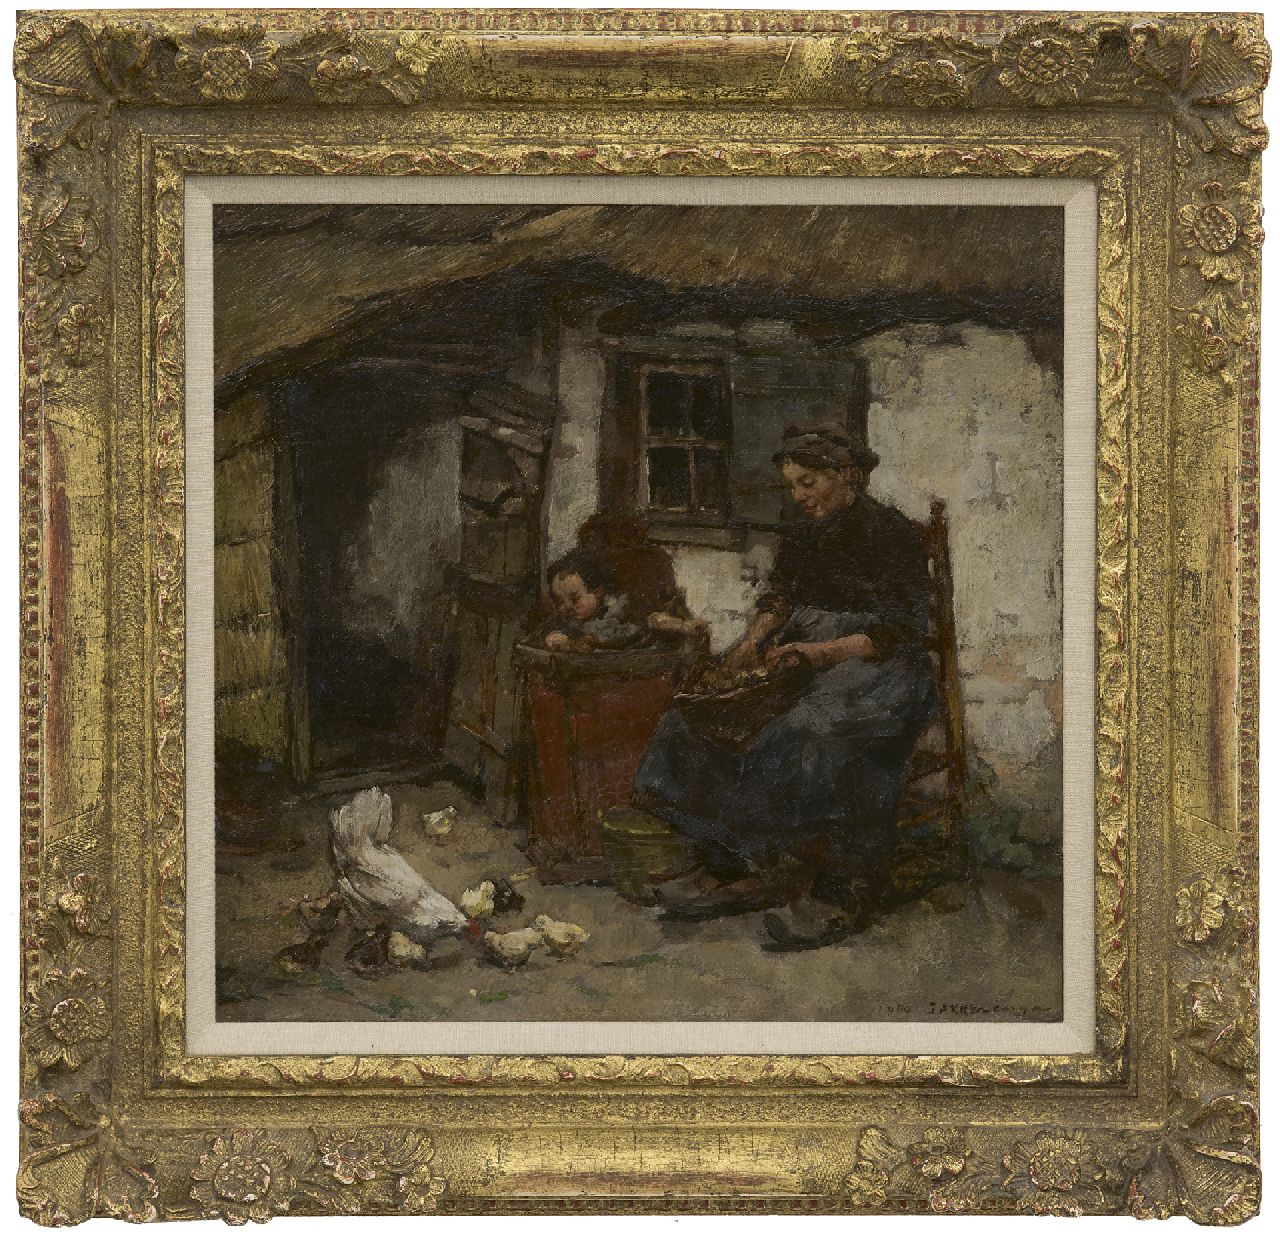 Akkeringa J.E.H.  | 'Johannes Evert' Hendrik Akkeringa | Paintings offered for sale | A summer farmyard, Heeze, oil on canvas laid down on panel 34.9 x 36.3 cm, signed l.r. and dated 1904